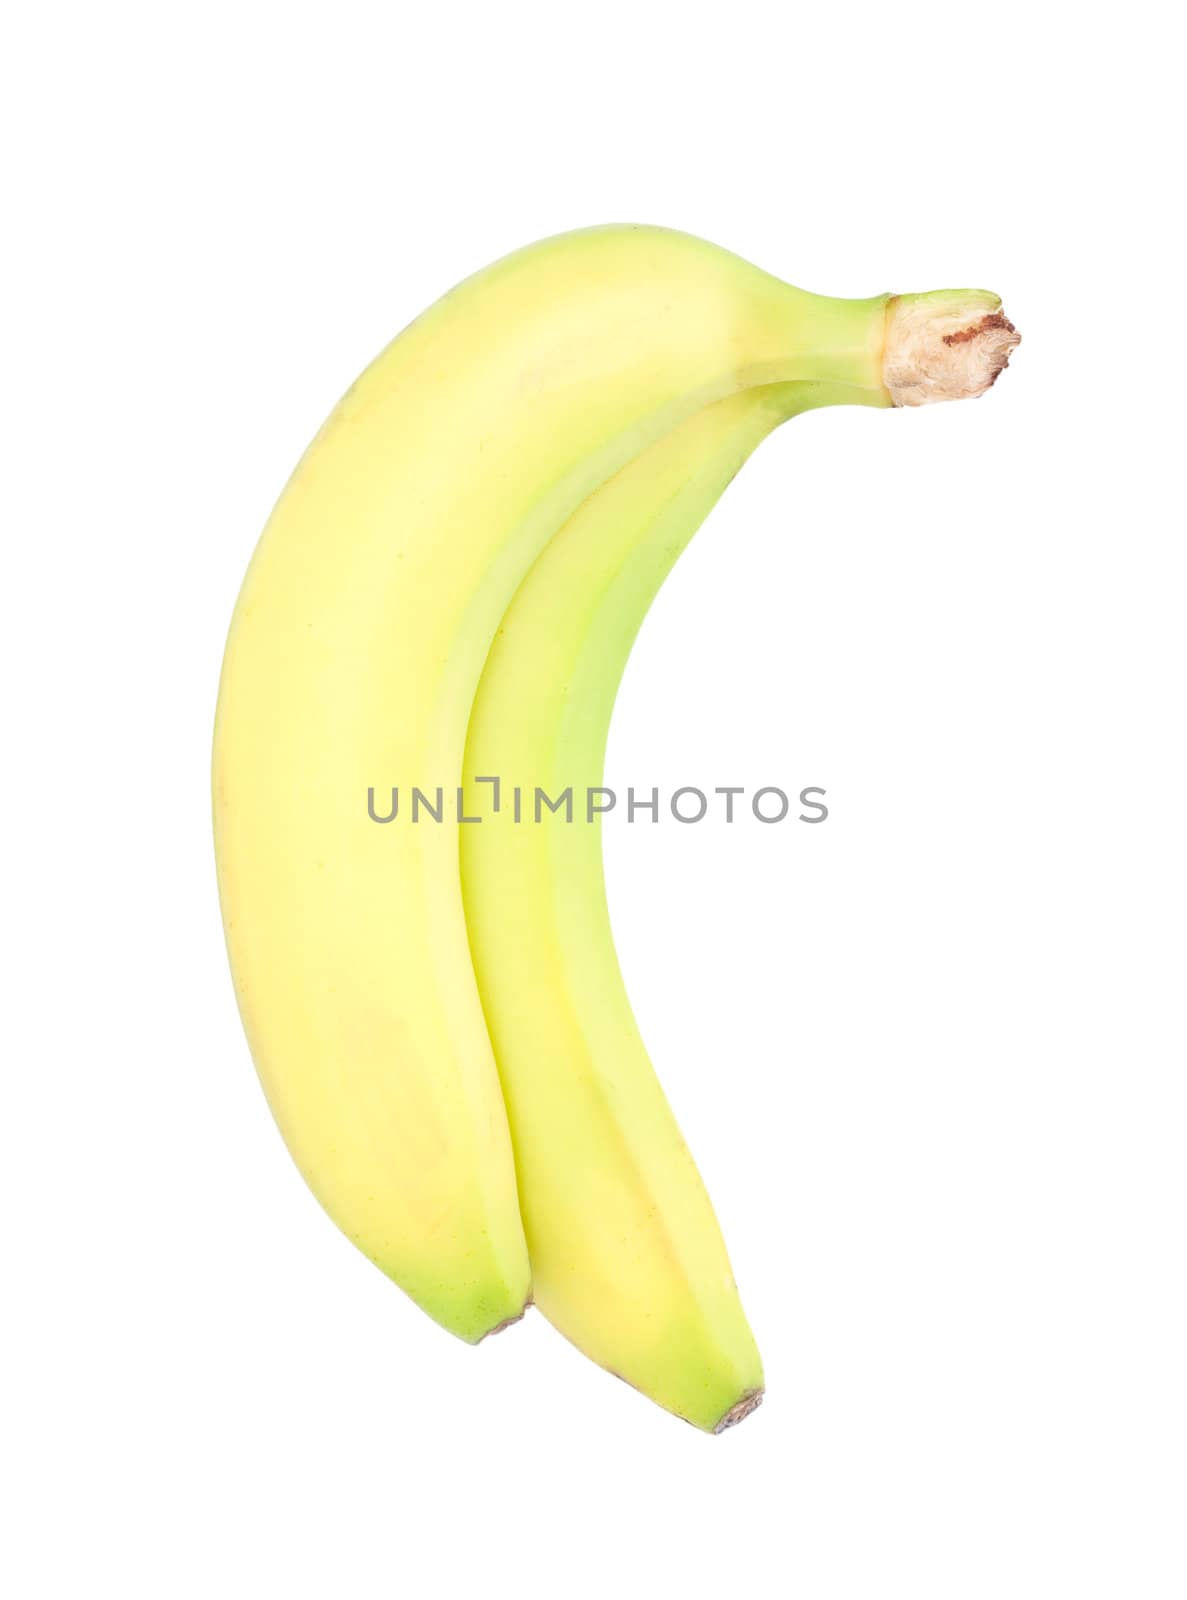 Bunch of bananas isolated on white background  by schankz